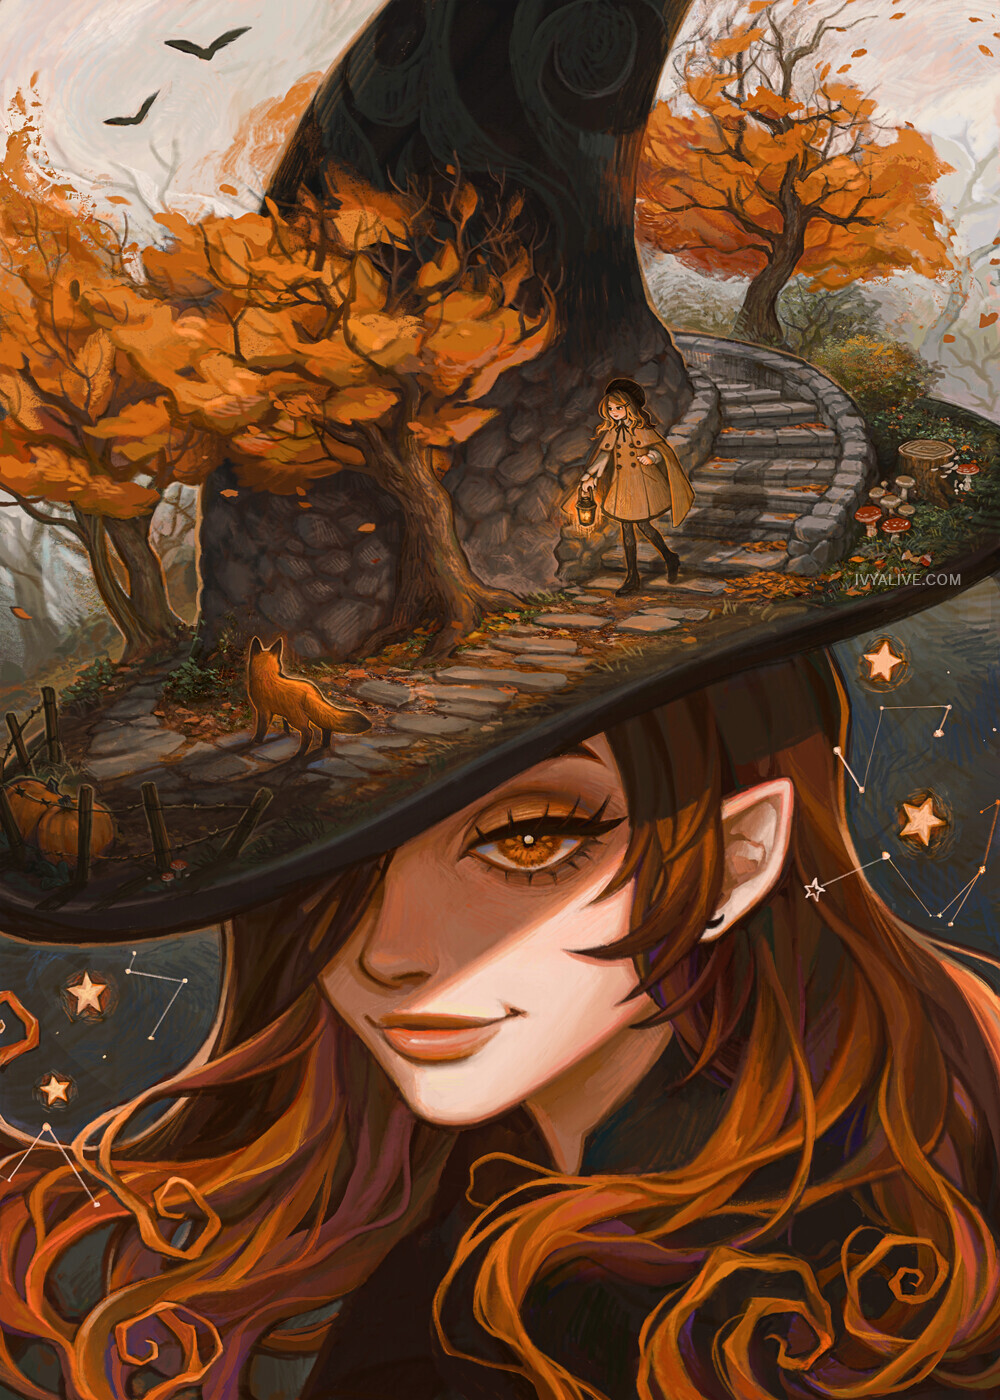 Spiral - Drawing, Girls, Witch, Autumn, Stairs, Spiral, Fox, Art, Ivy Dolamore